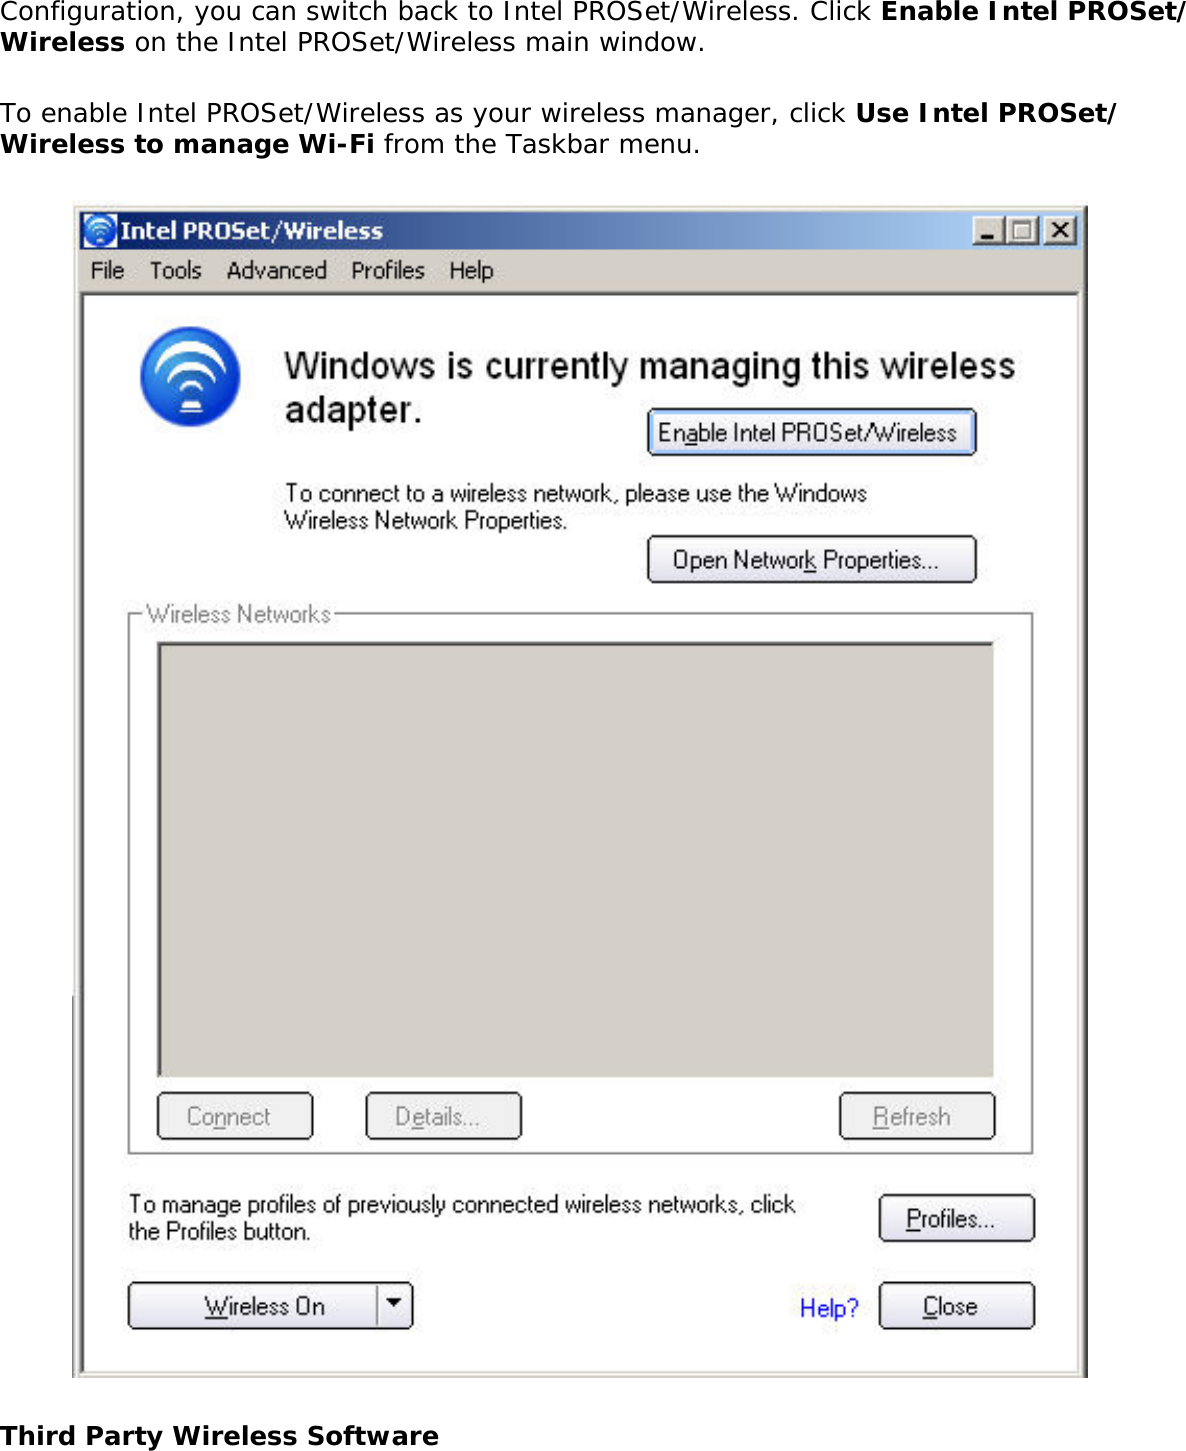 Configuration, you can switch back to Intel PROSet/Wireless. Click Enable Intel PROSet/Wireless on the Intel PROSet/Wireless main window. To enable Intel PROSet/Wireless as your wireless manager, click Use Intel PROSet/Wireless to manage Wi-Fi from the Taskbar menu.  Third Party Wireless Software